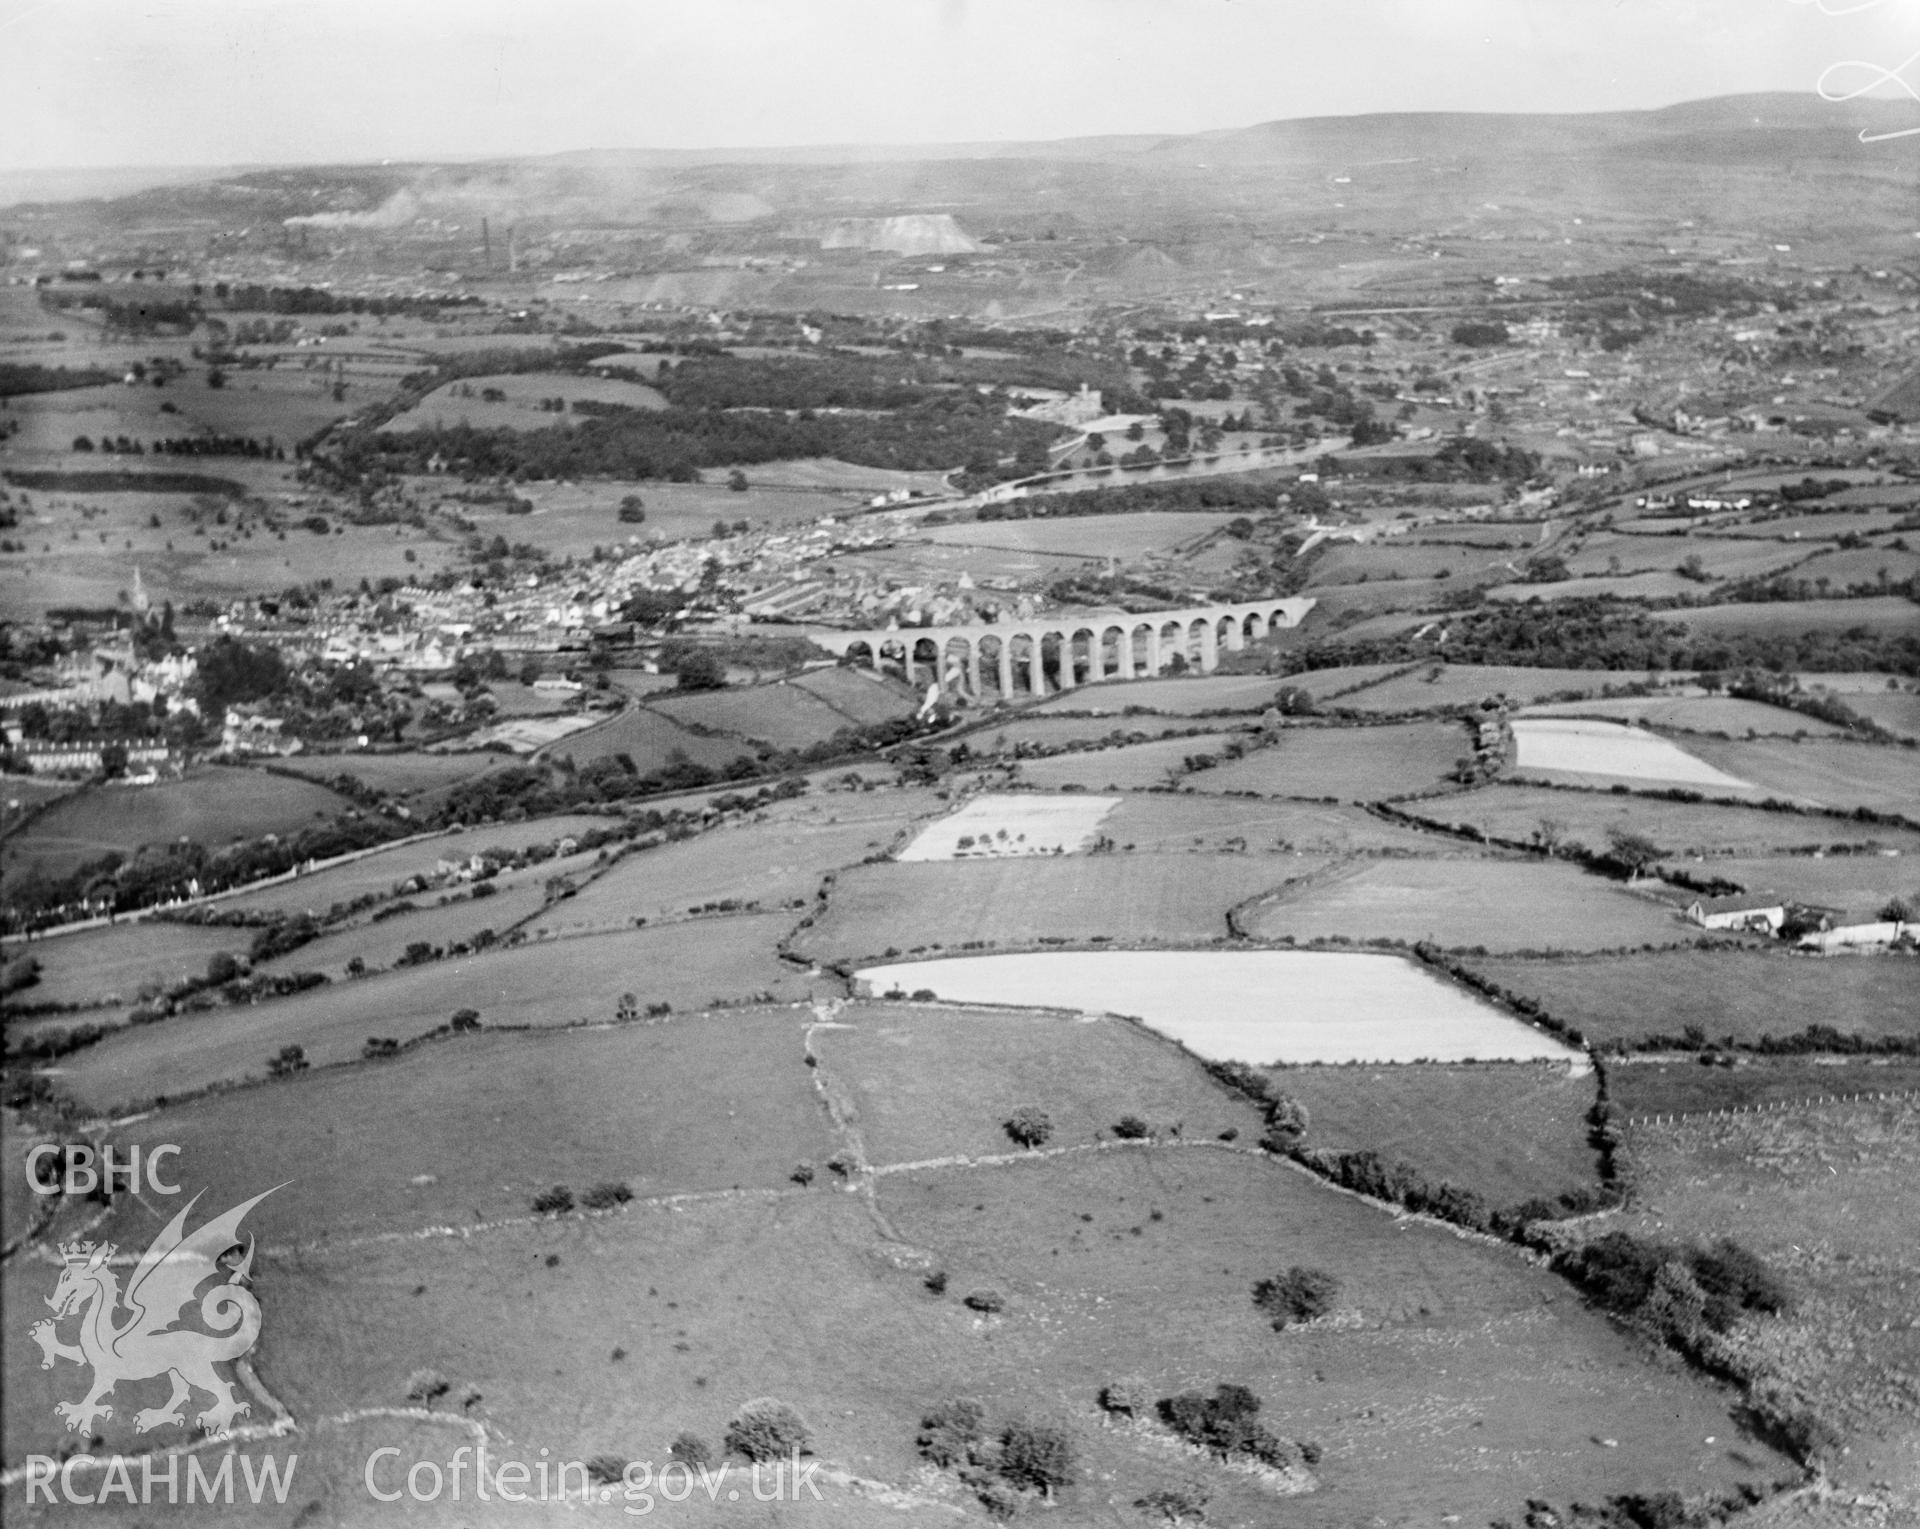 View of Merthyr Tydfil, showing Cefn Viaduct, oblique aerial view. 5?x4? black and white glass plate negative.